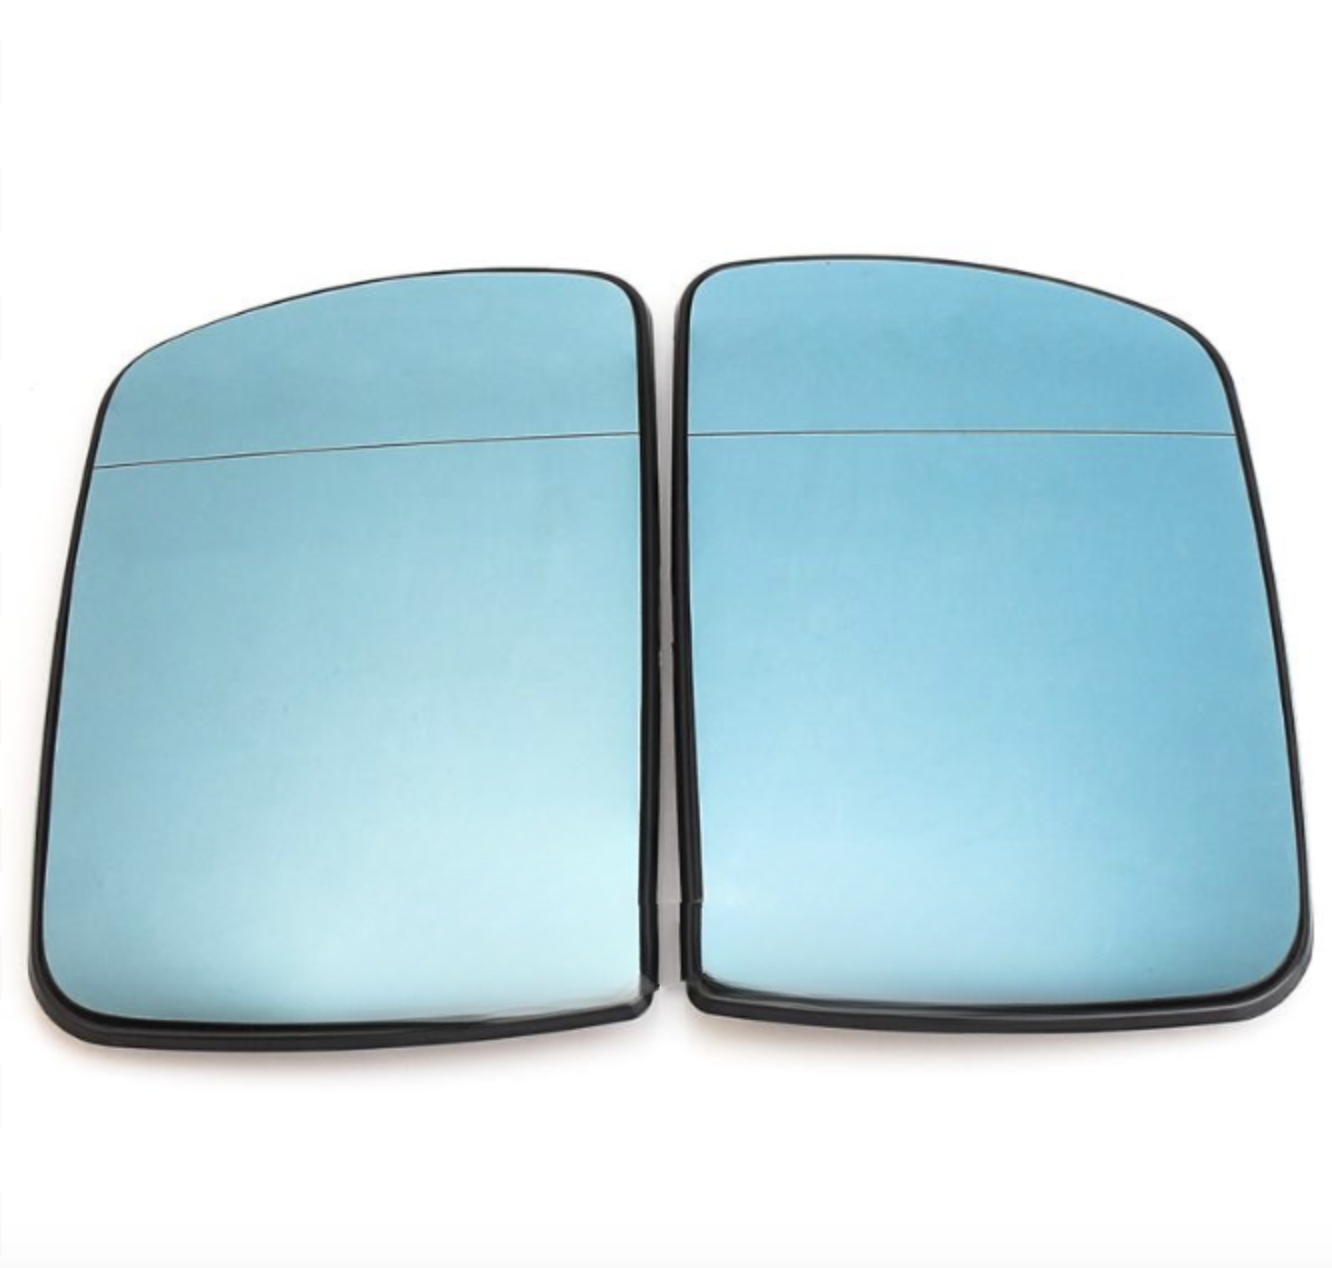 LEFT Side Door Wing Mirror Glass Heated Blue Left Suitable For BMW X5 E53 99-06 3.0i 4.4i Rearview Mirror